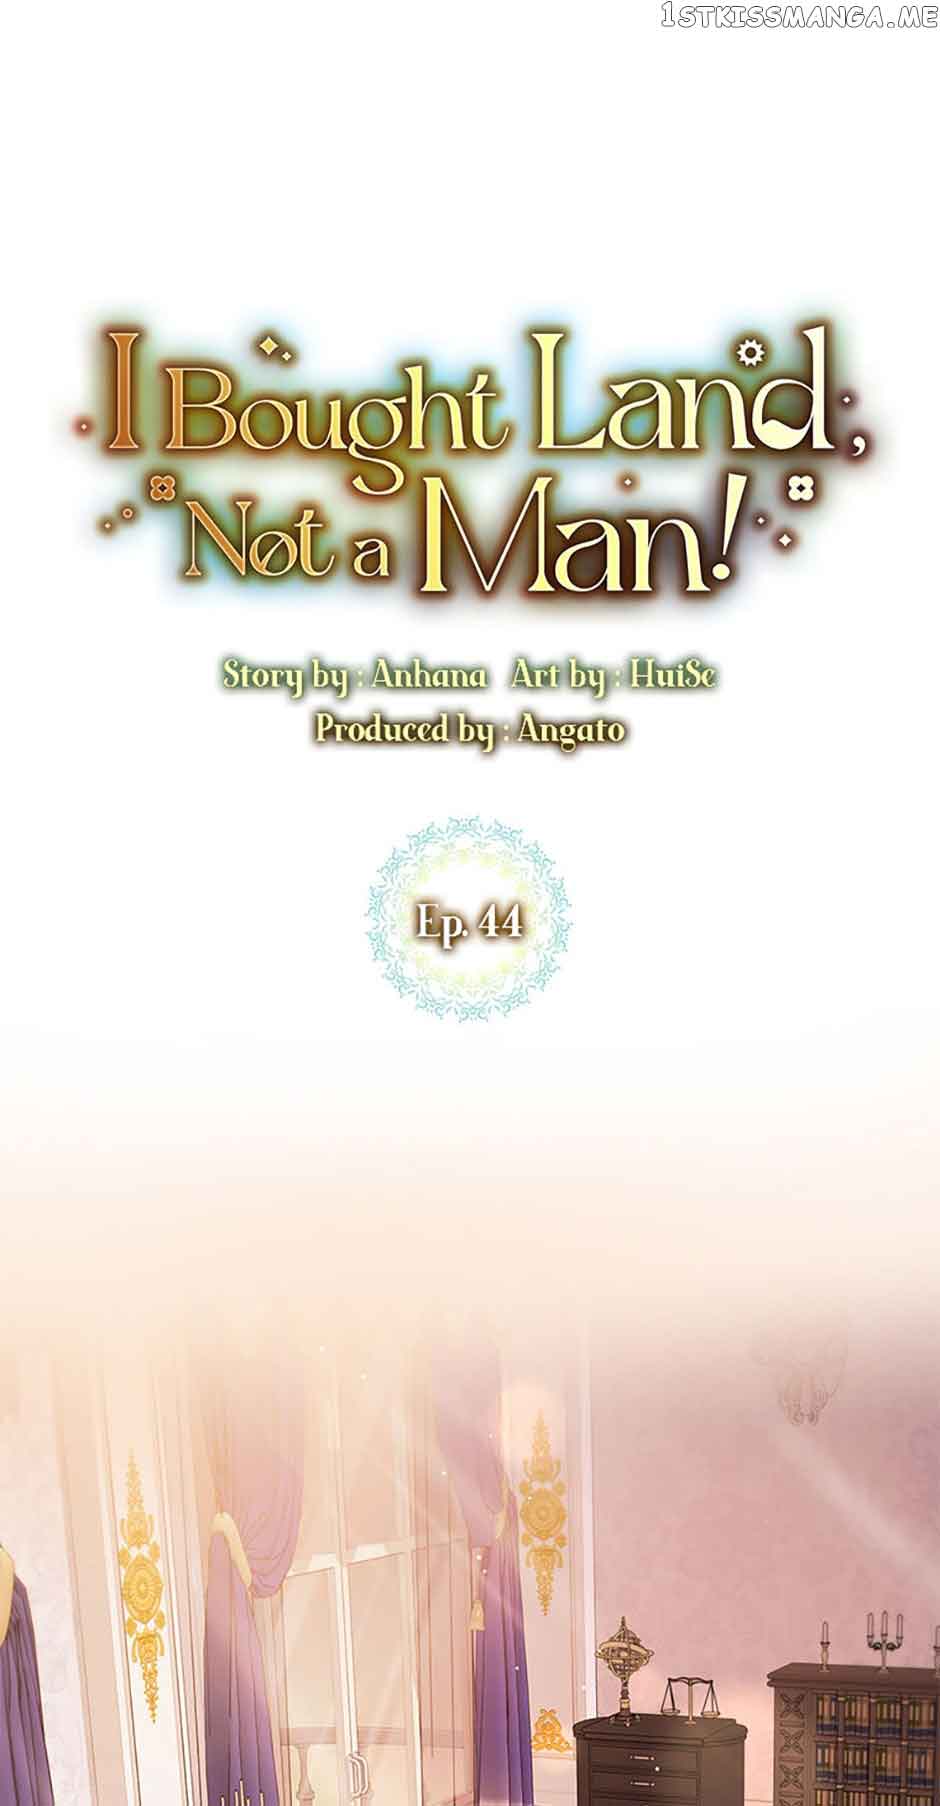 I bought the land, not the man chapter 44